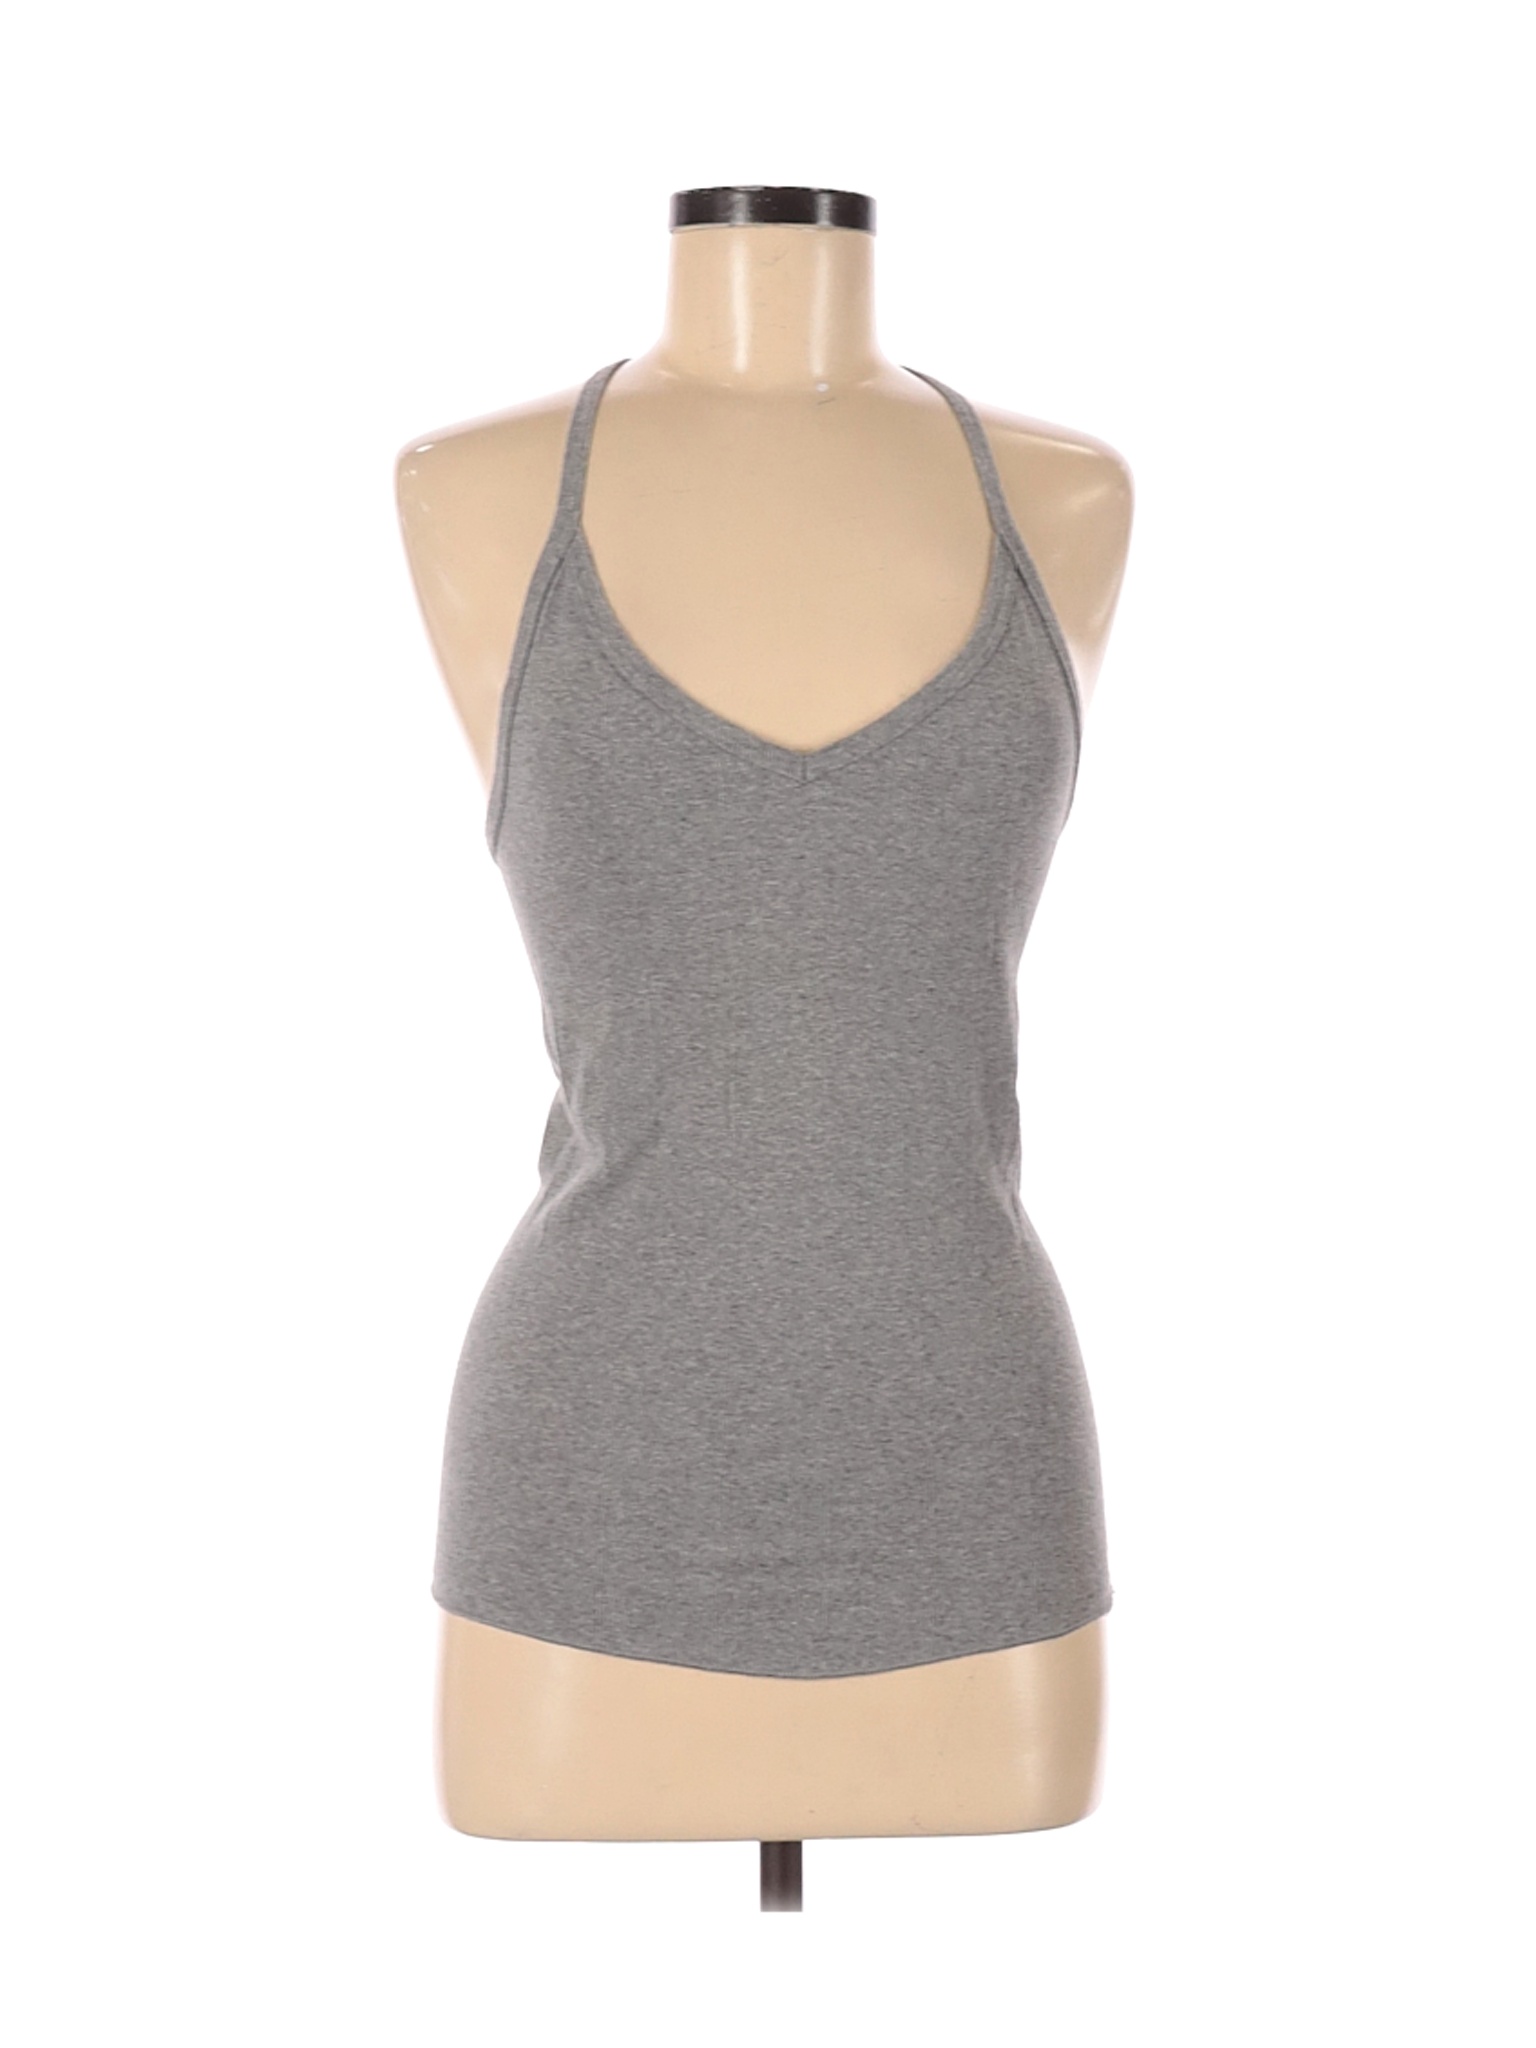 Out From Under Women Gray Tank Top M | eBay